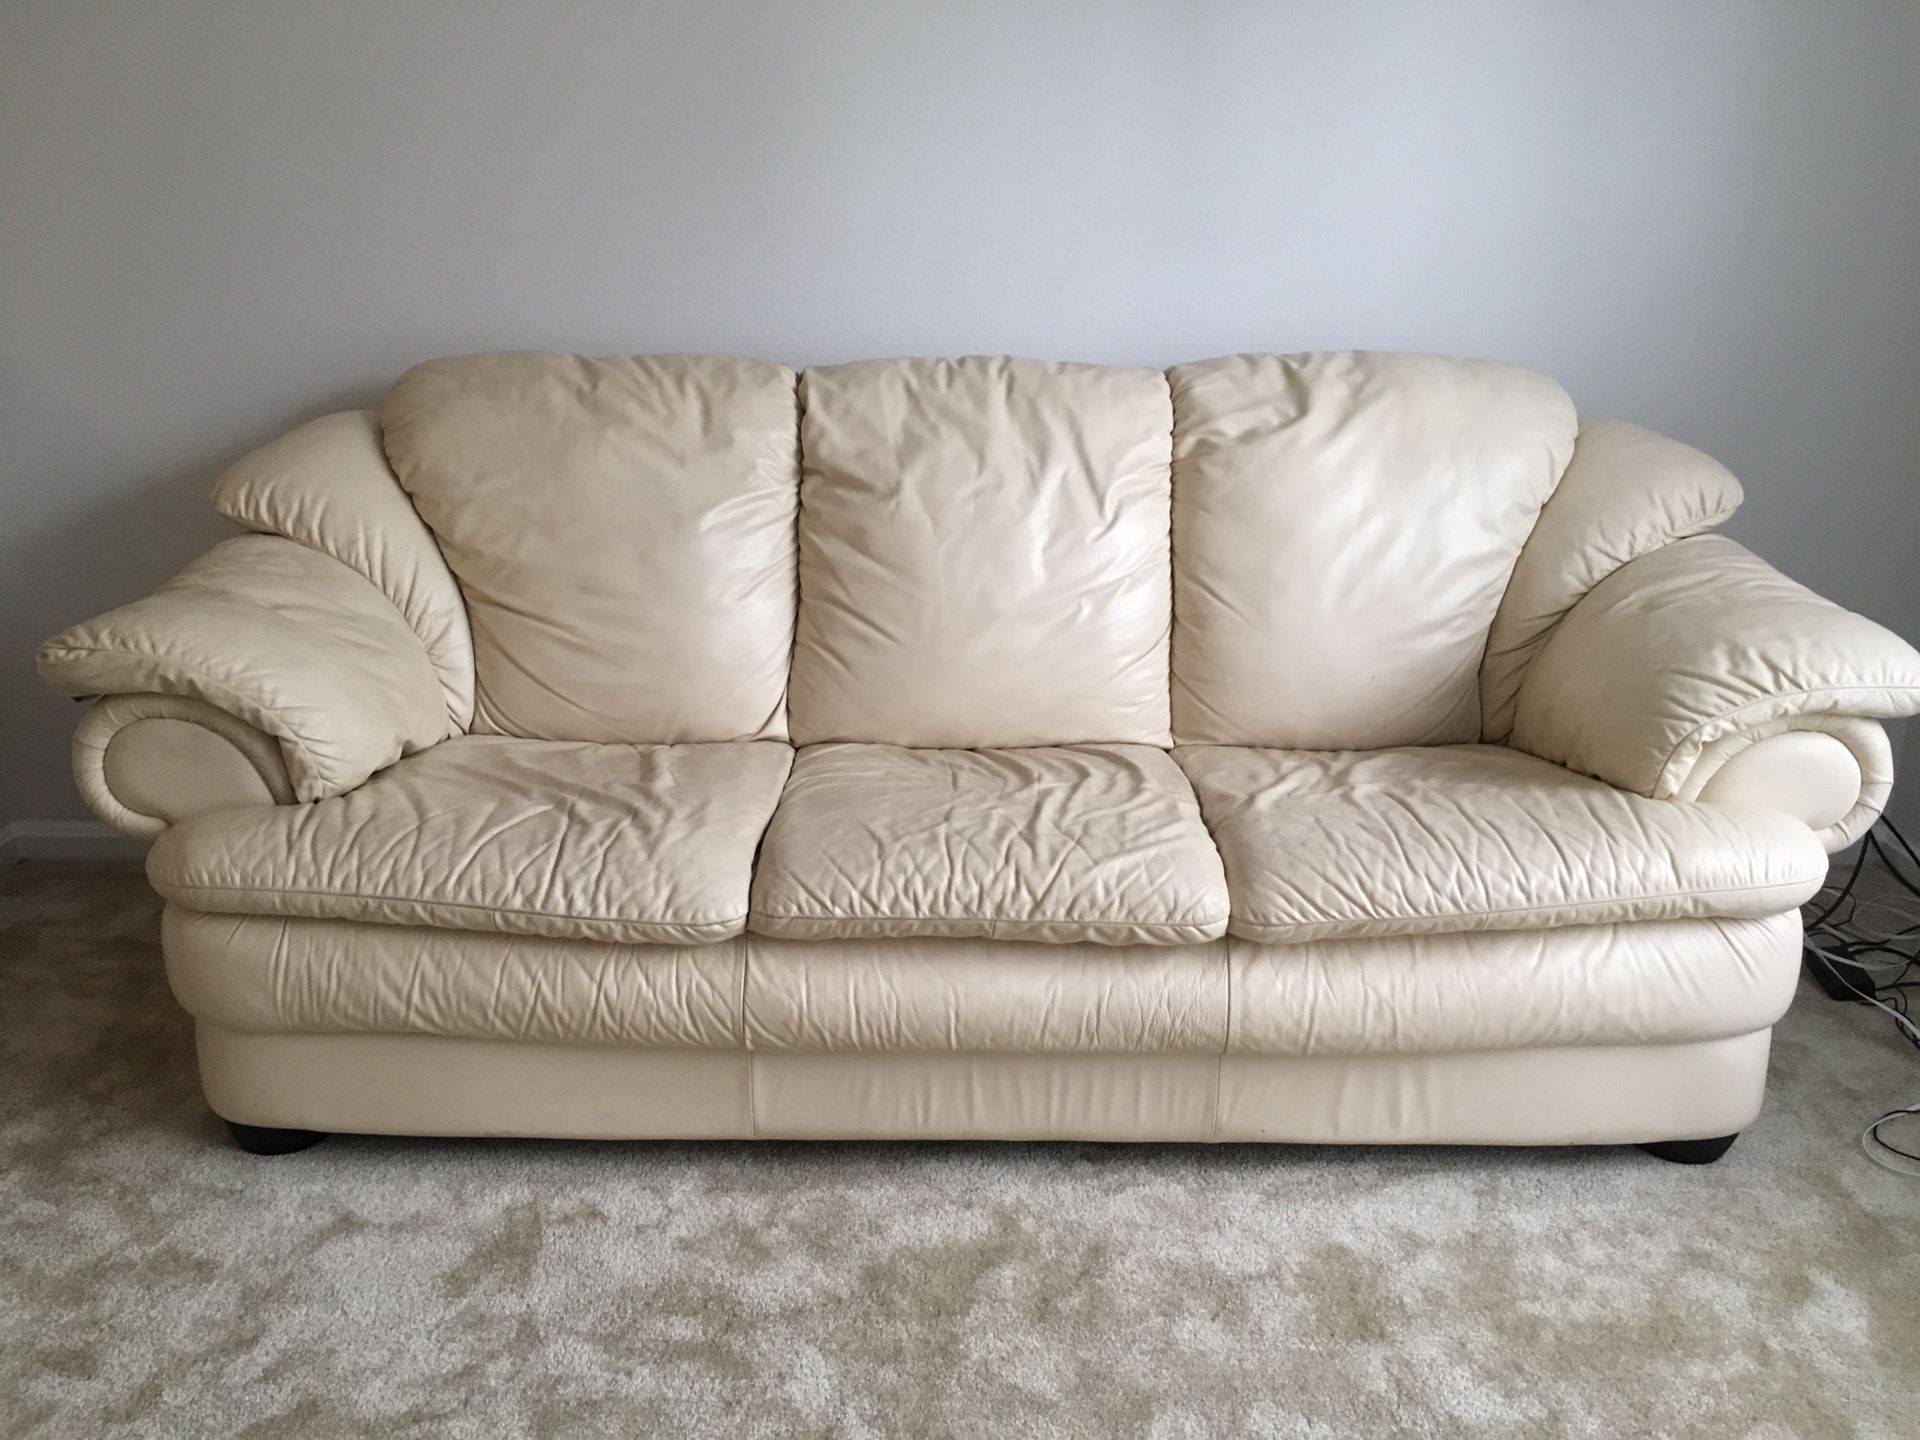 Used Leather Couch